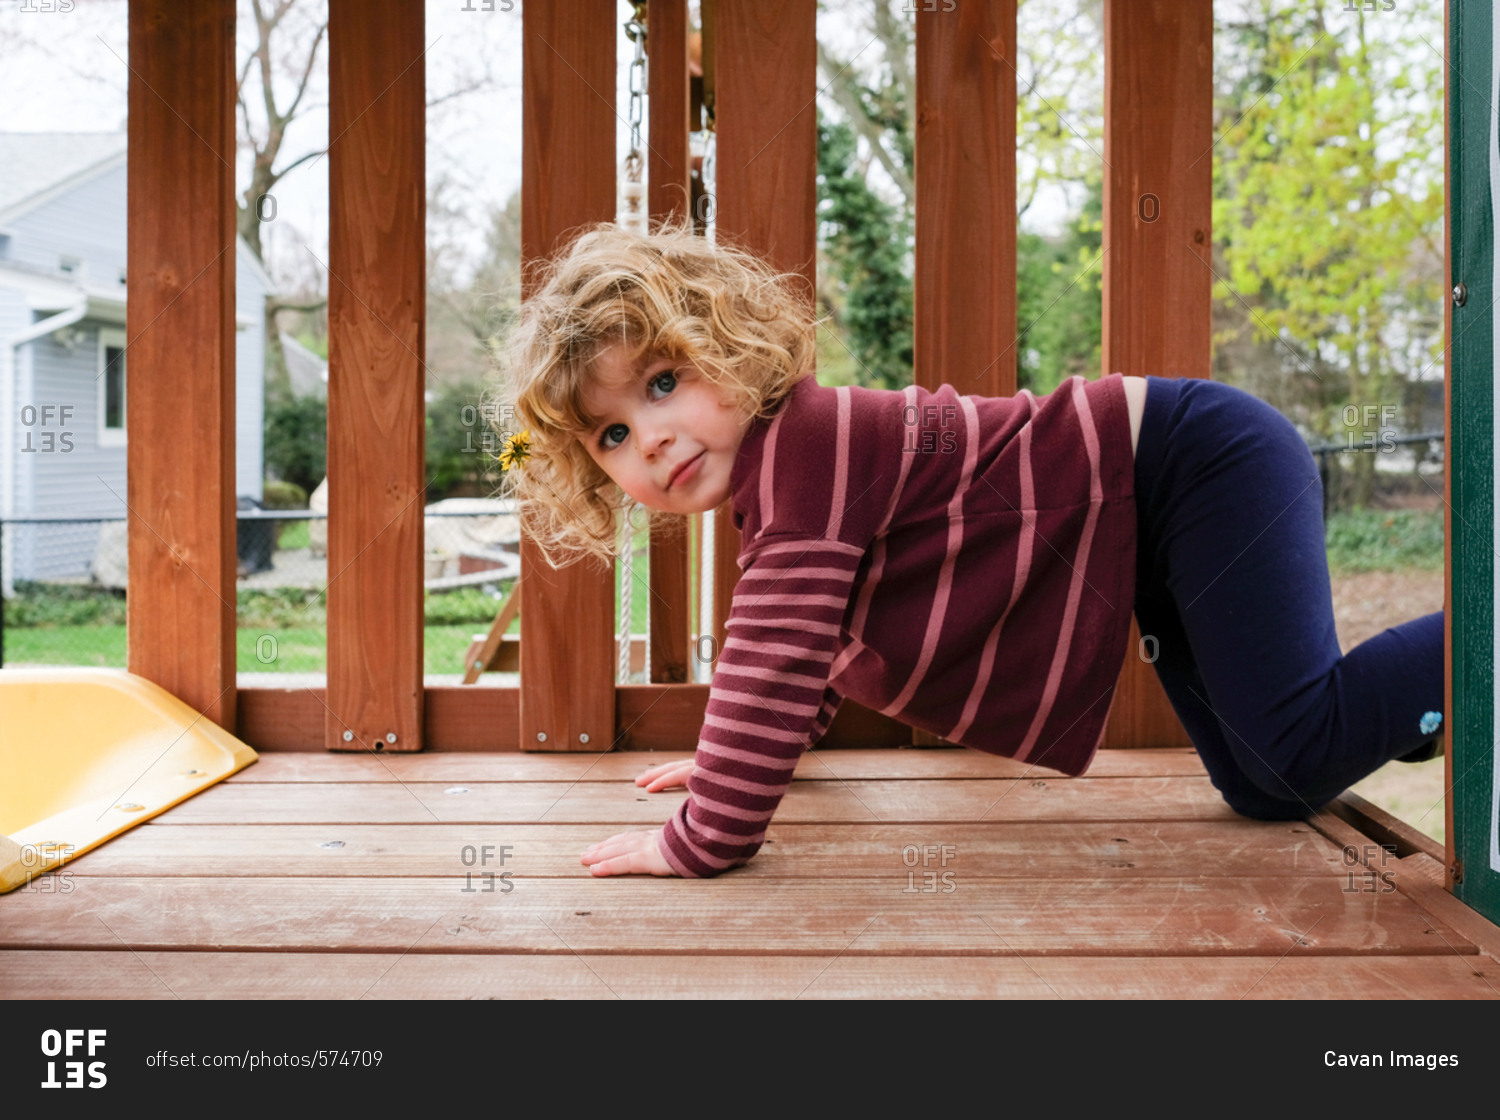 Side view portrait of girl kneeling on wooden outdoor play equipment at yard